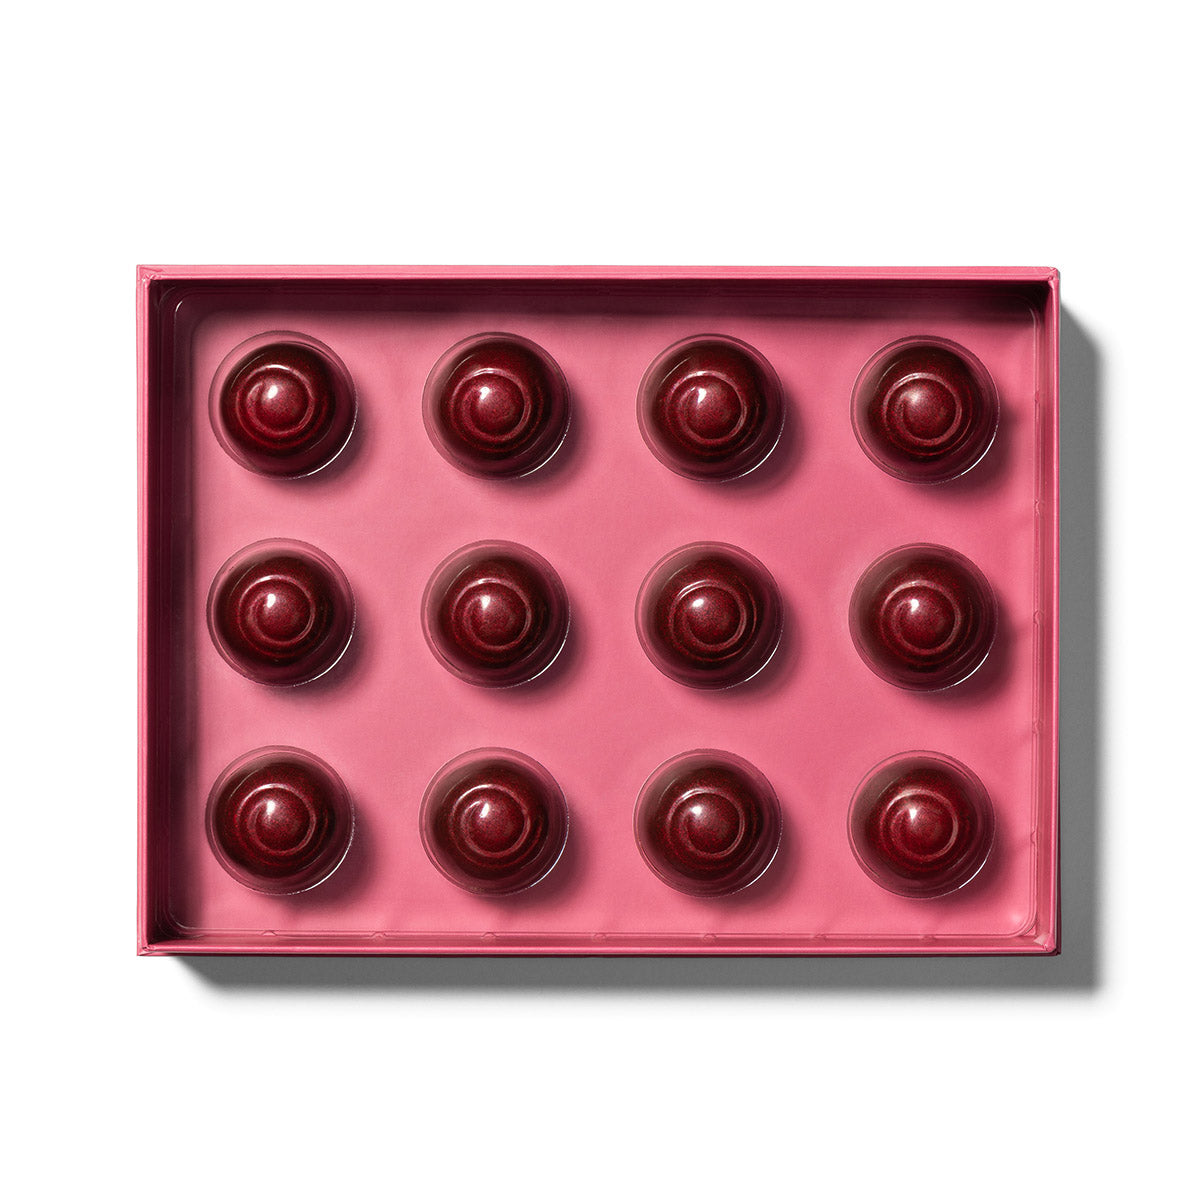 Cherry Cordial, is now in a box of its own. Each Cherry is made with Italian Marasca cherry with VSOP brandy, drenched in exquisite Dark Chocolate.